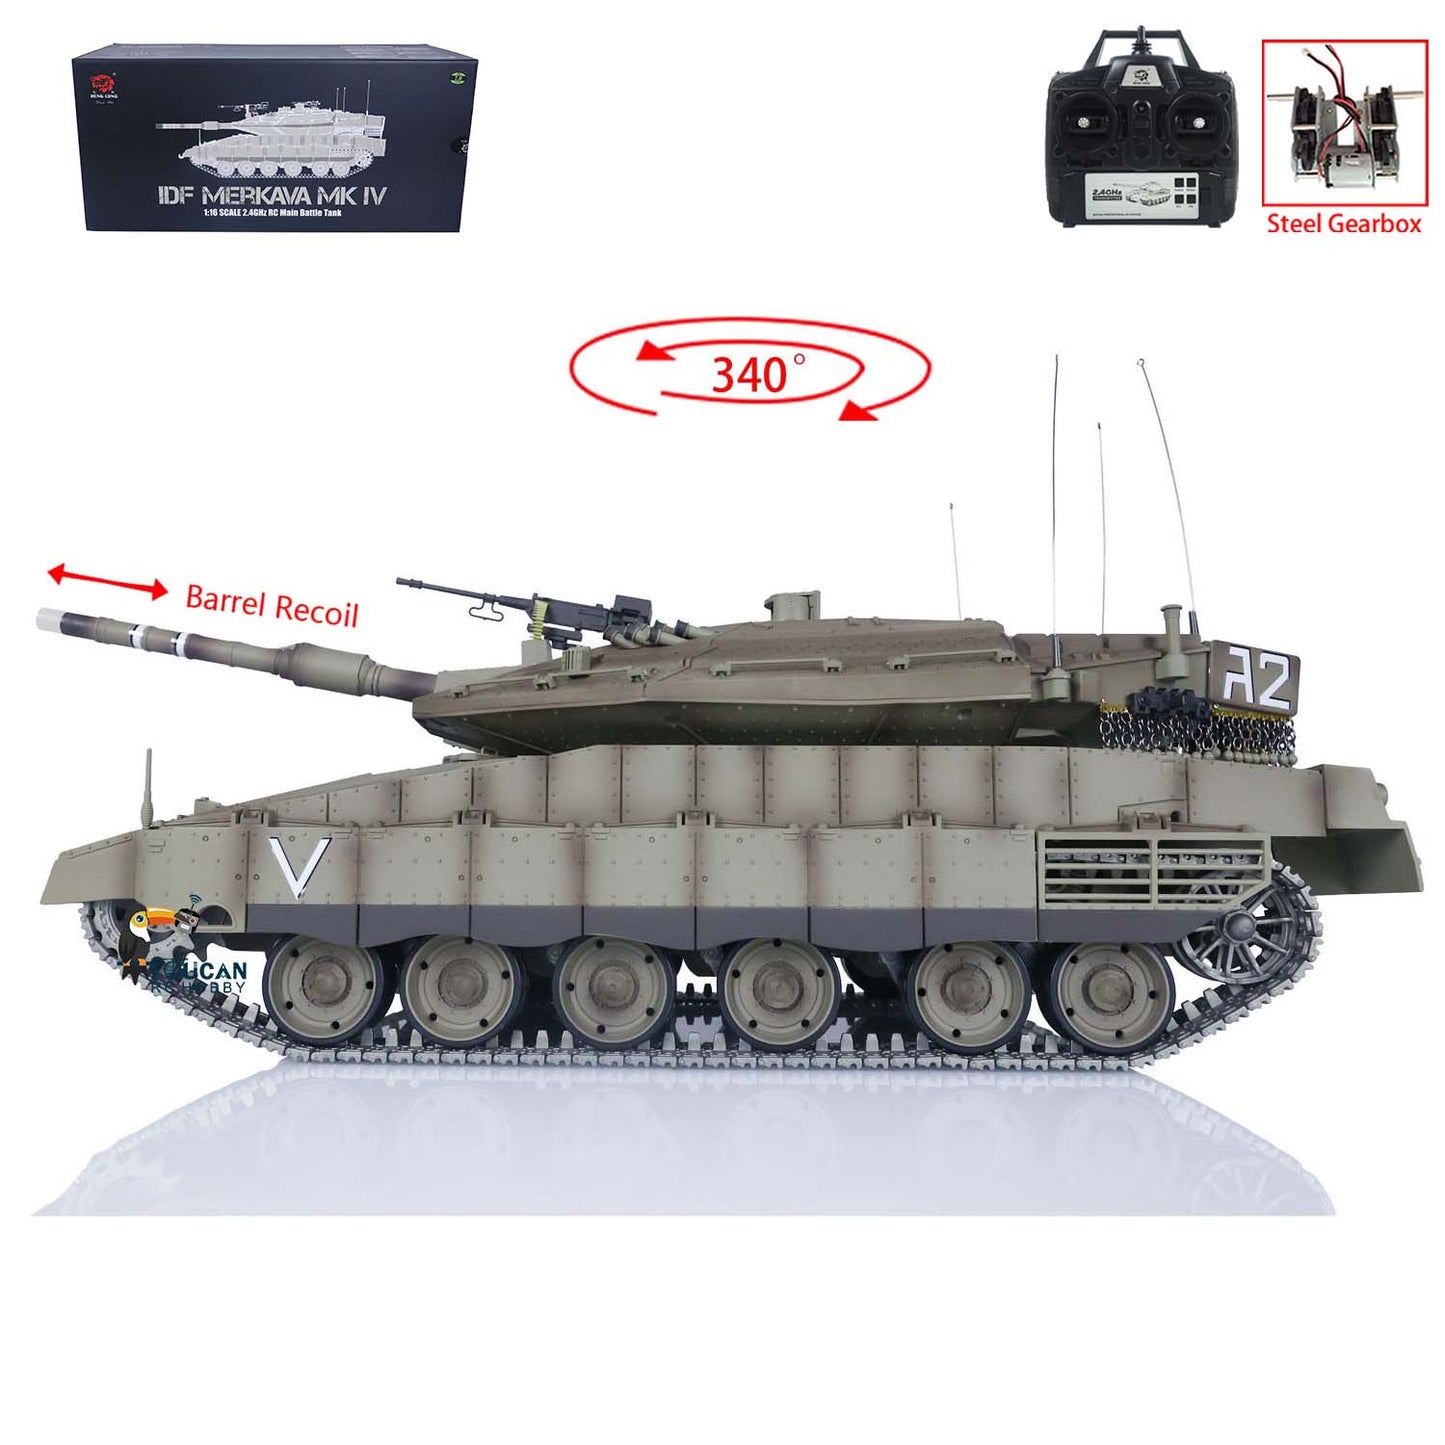 US Warehouse Henglong 1:16 RC Military Battle Tanks Remote Controlled Panzer DF Merkava MK IV 3958 Upgraded Edition Electric Model